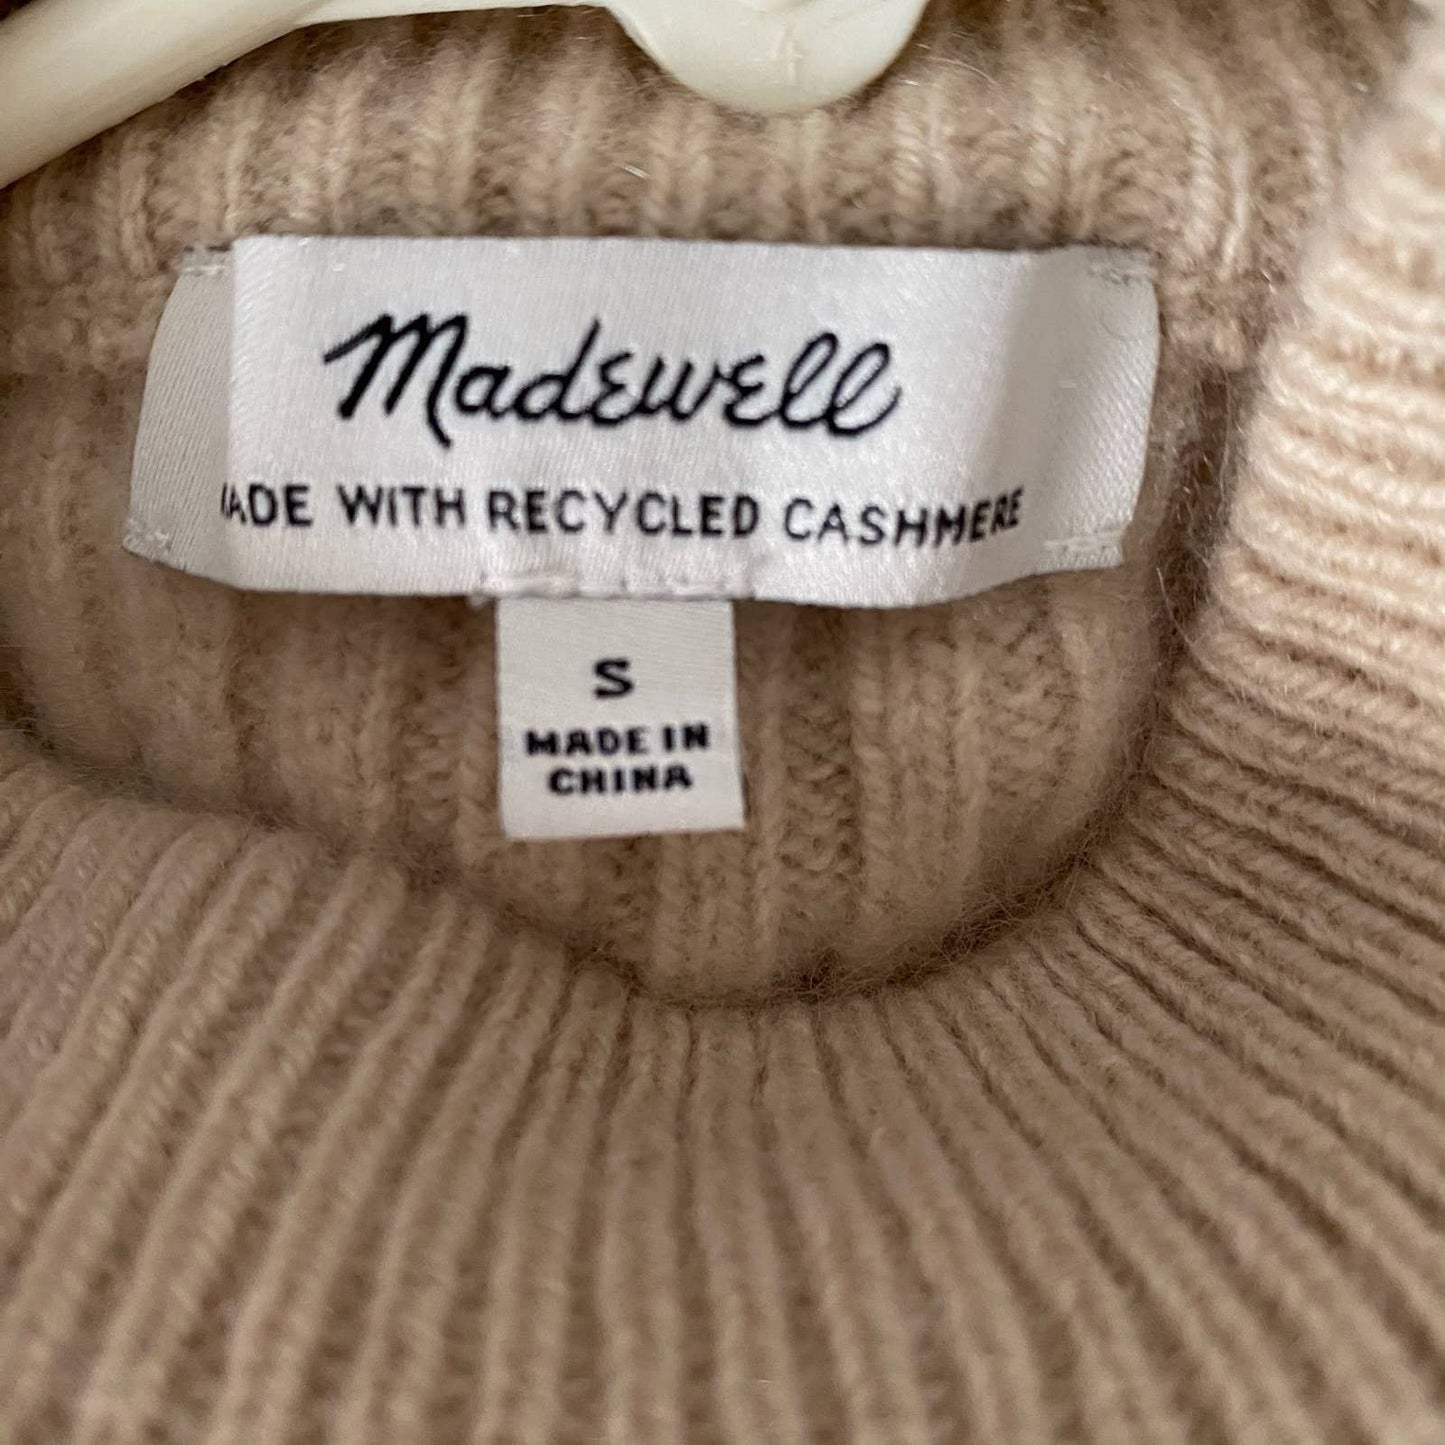 Madewell sz S cashmere turtleneck cropped sweater